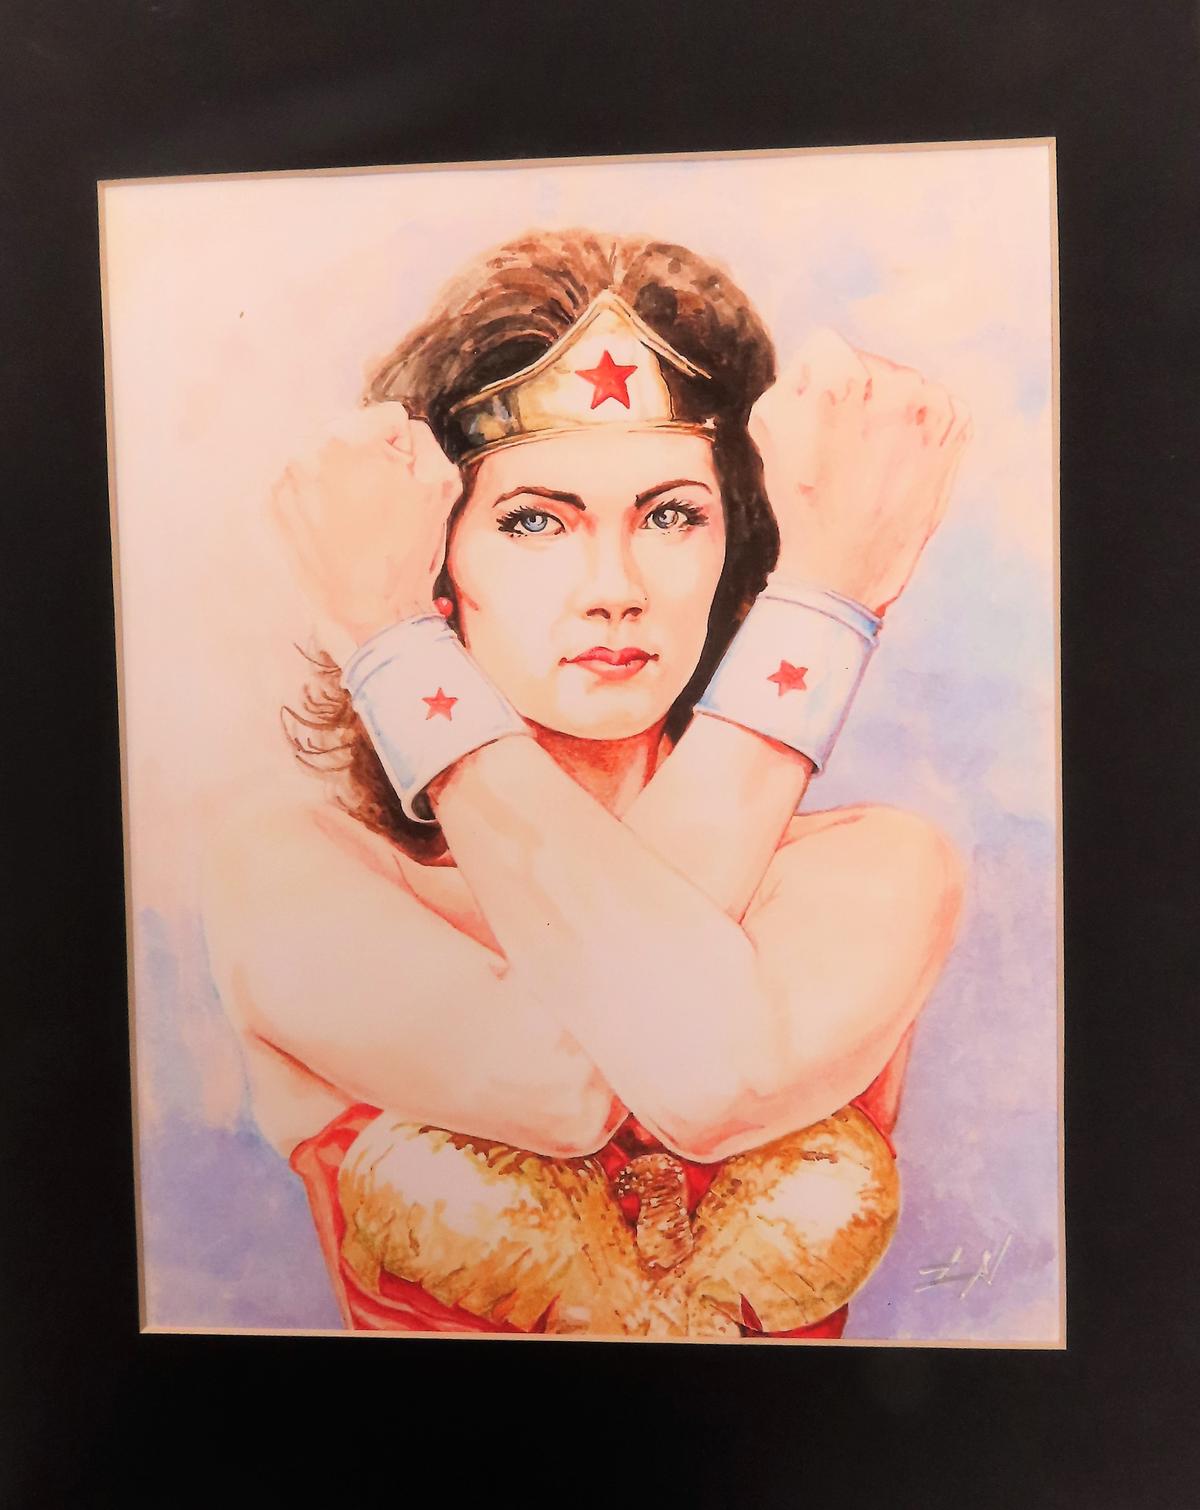 8"x10" (11"x14" Matted) Wonder Woman by Kevin Leen, Signed by Kevin Leen, comic illustrator. print